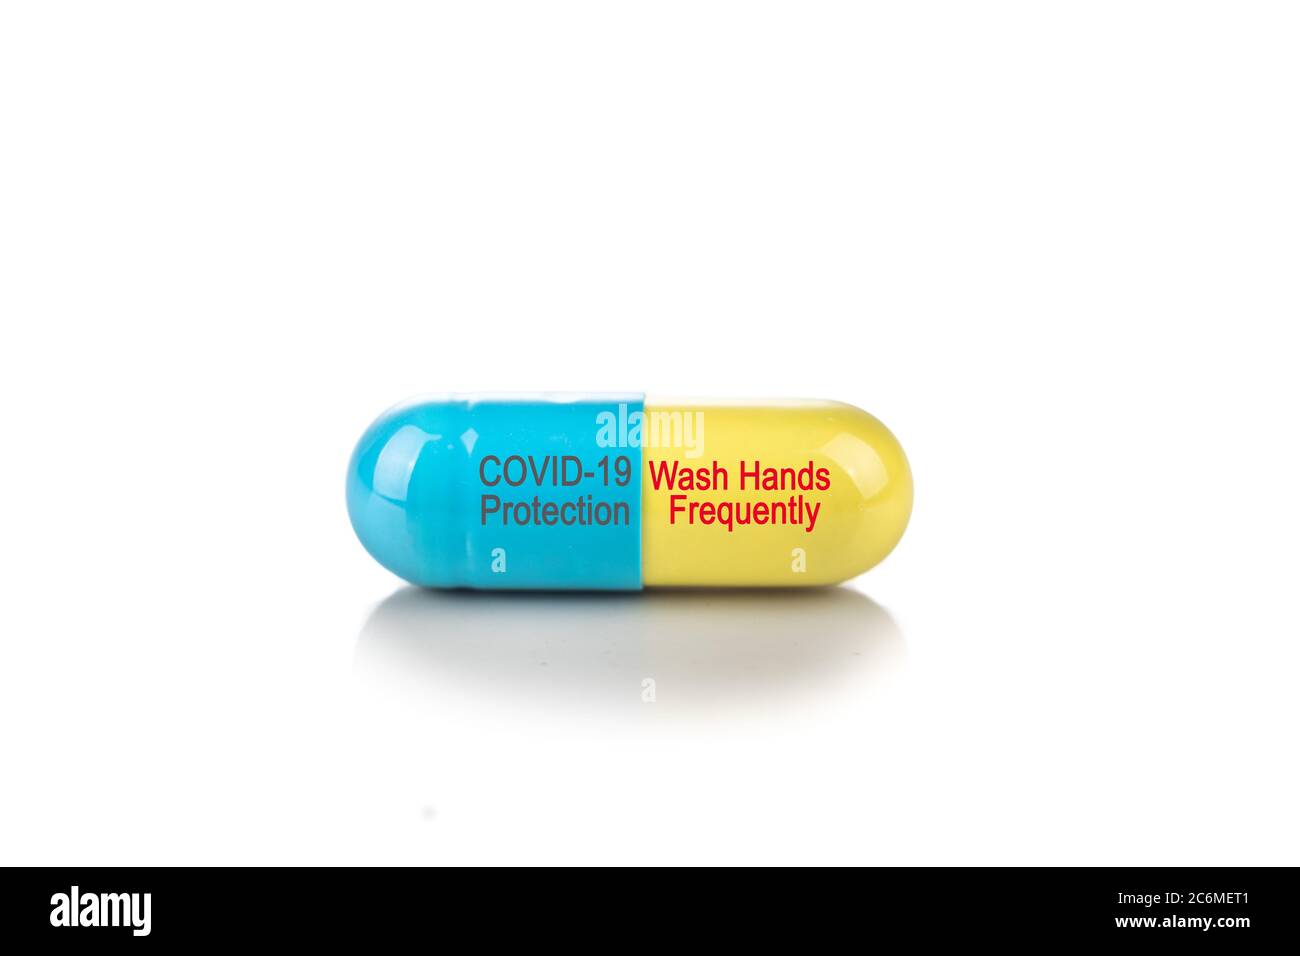 Conceptual Covid-19 protection capsule with Wash Hands Frequently advisory message on white background Stock Photo